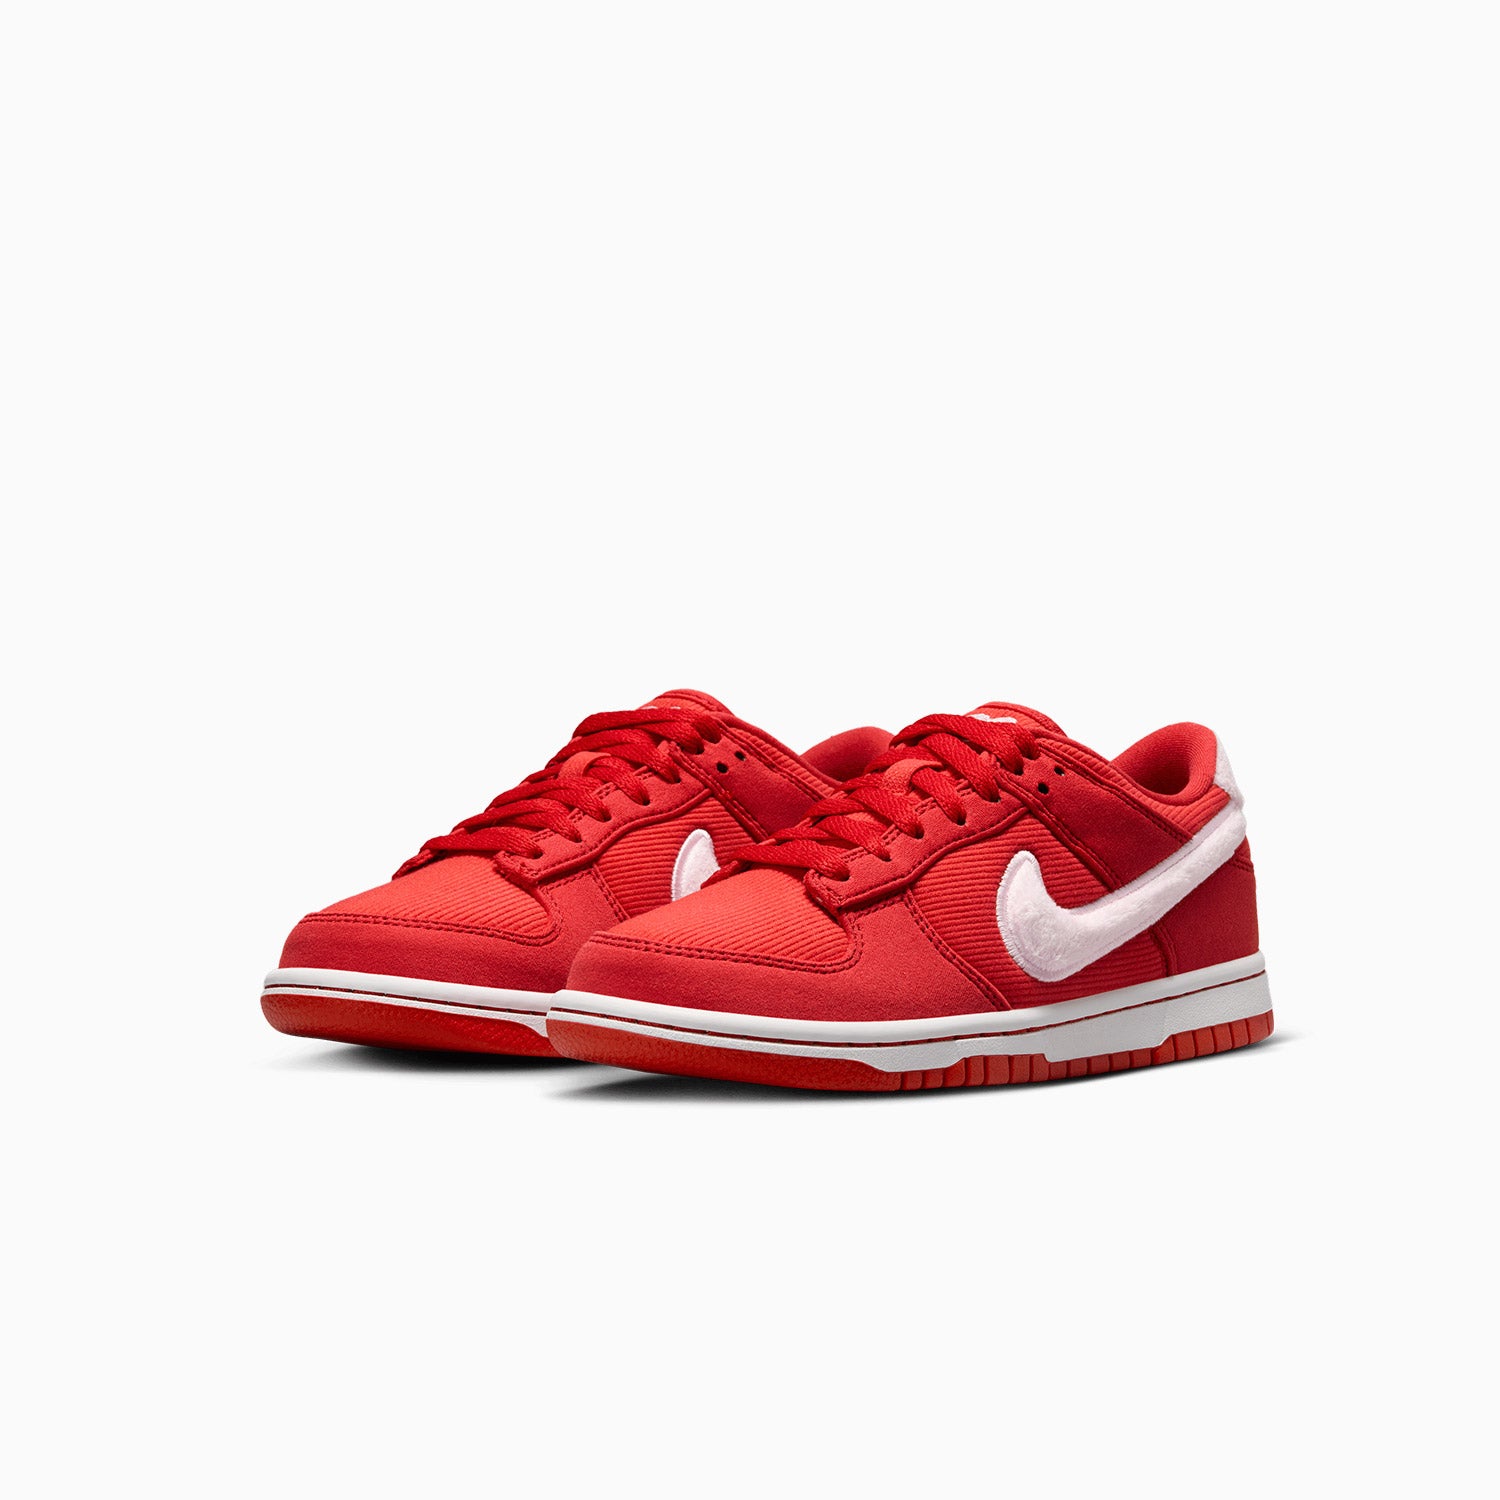 nike-kids-dunk-low-valentines-day-grade-school-shoes-fz3548-612